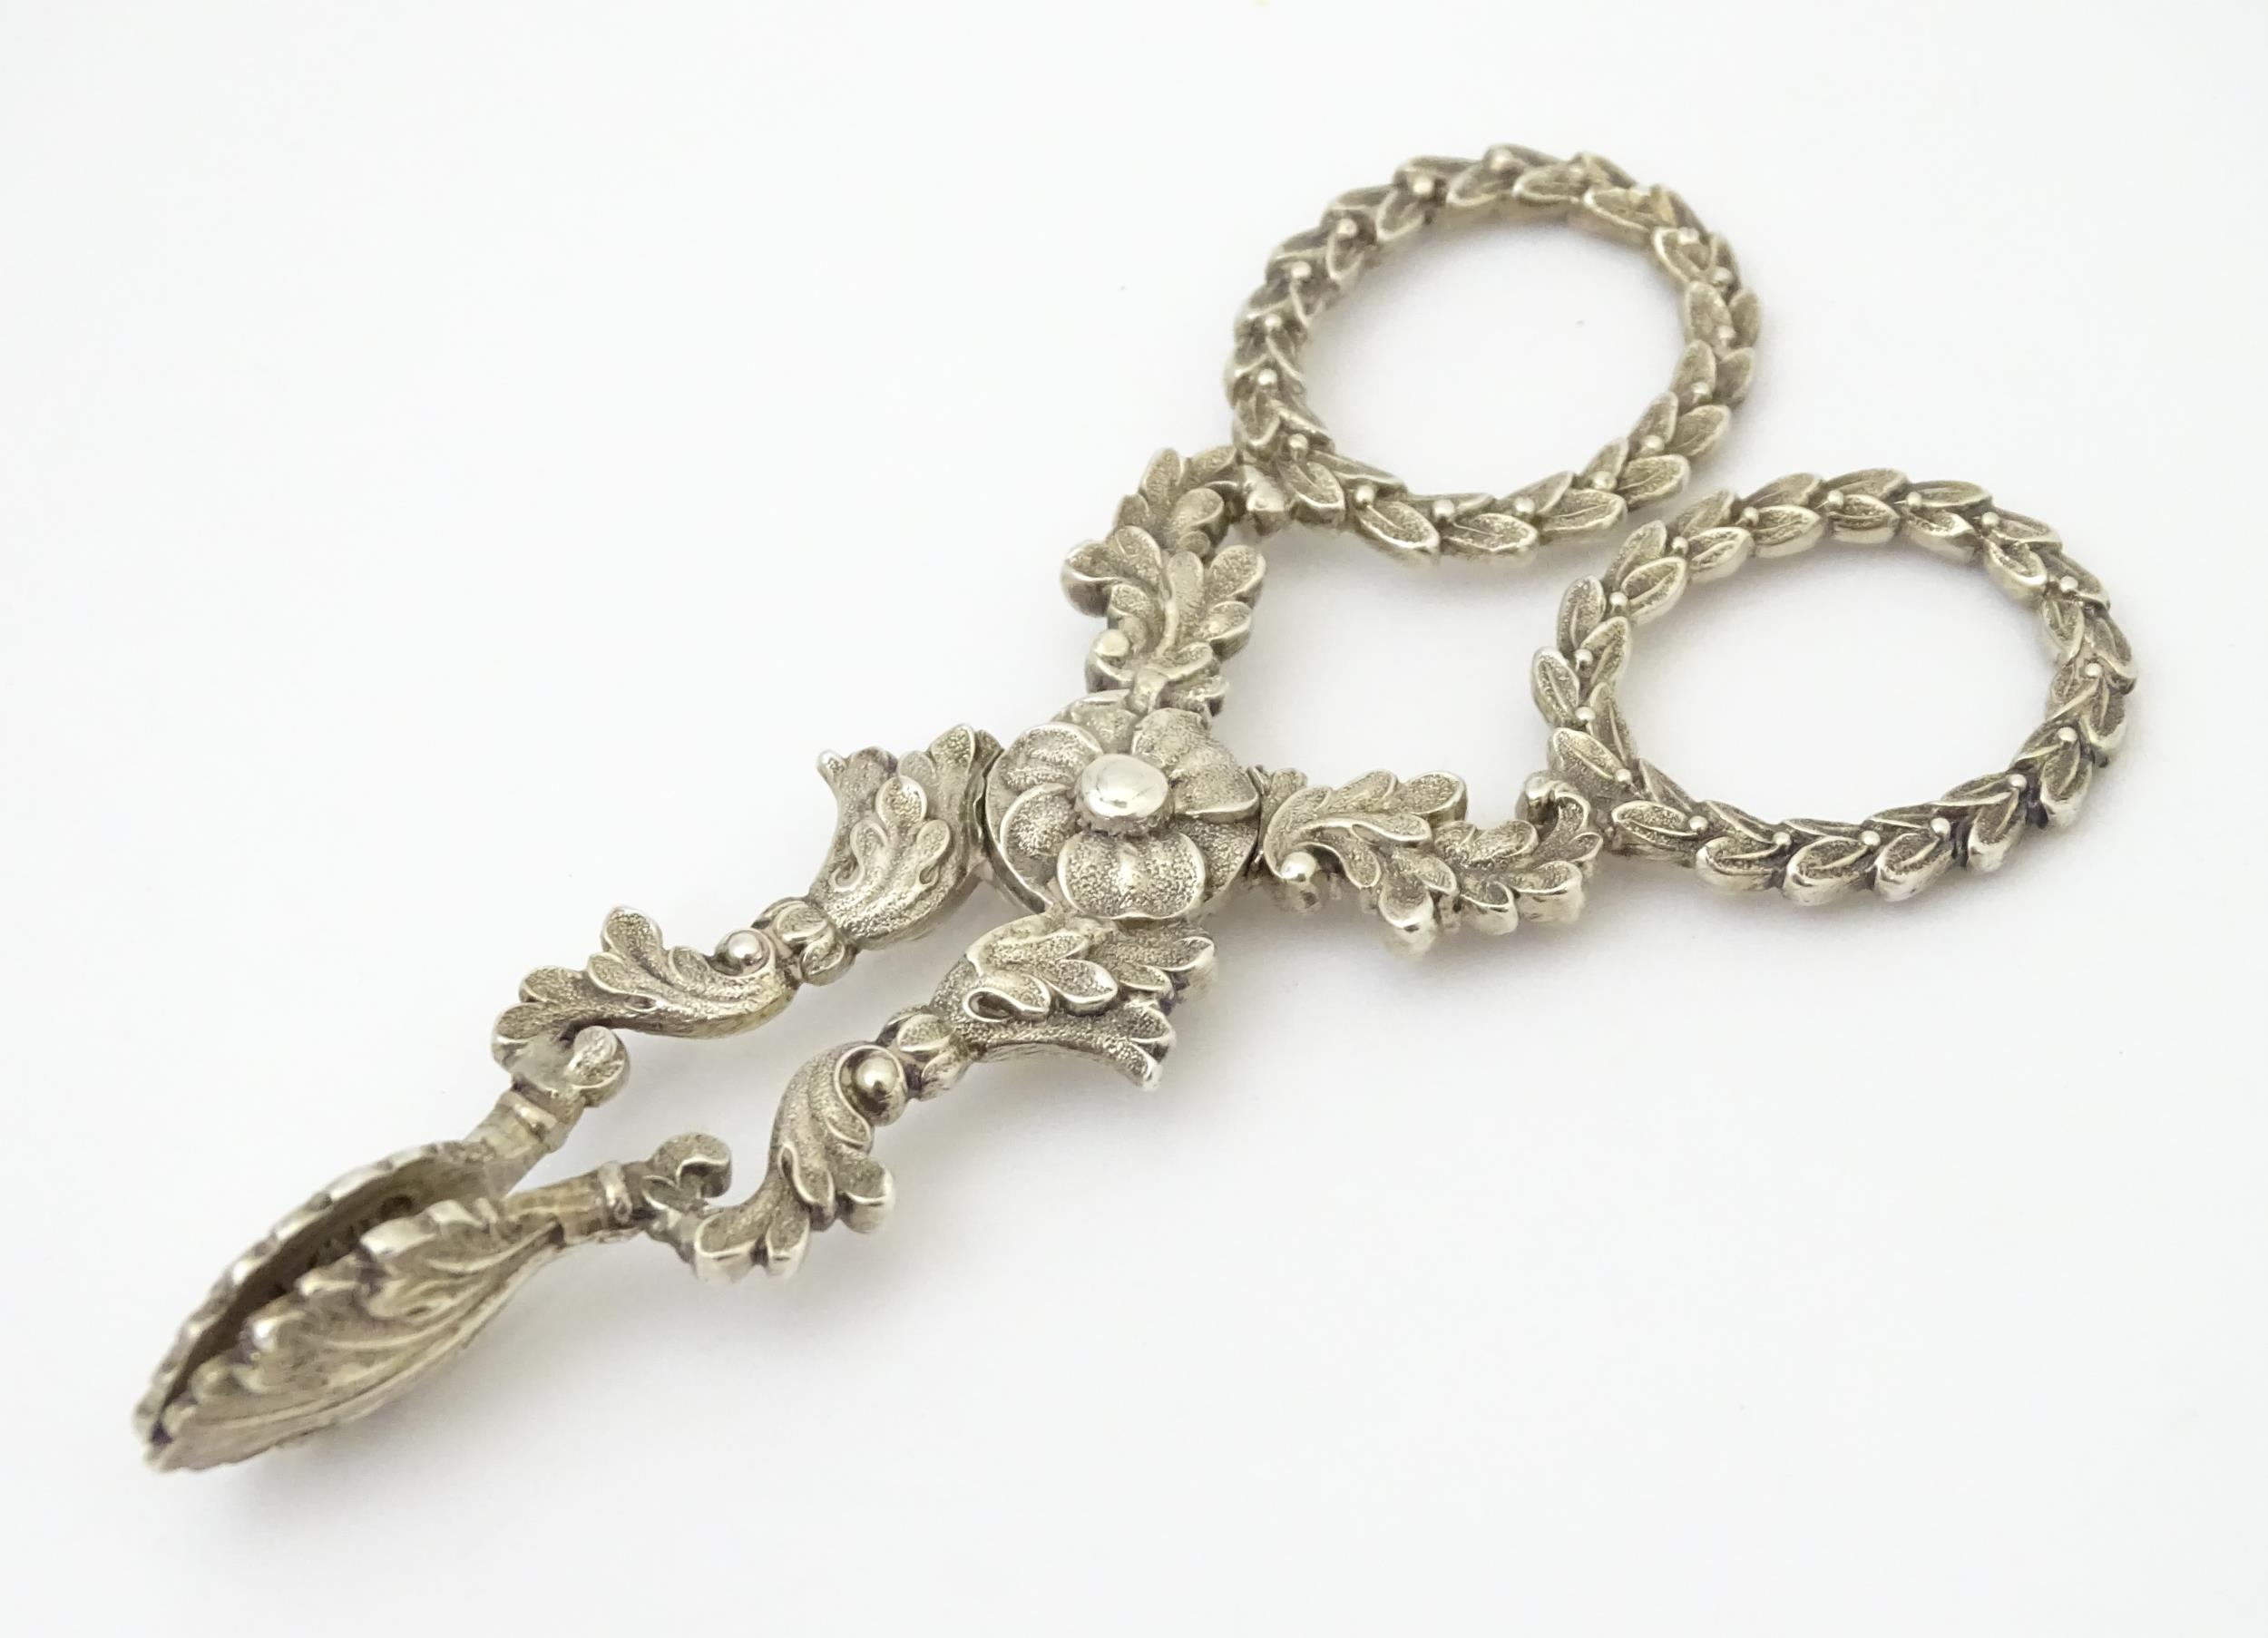 William IV silver sugar nips with foliate detail and laurel chaplet formed handles, hallmarked